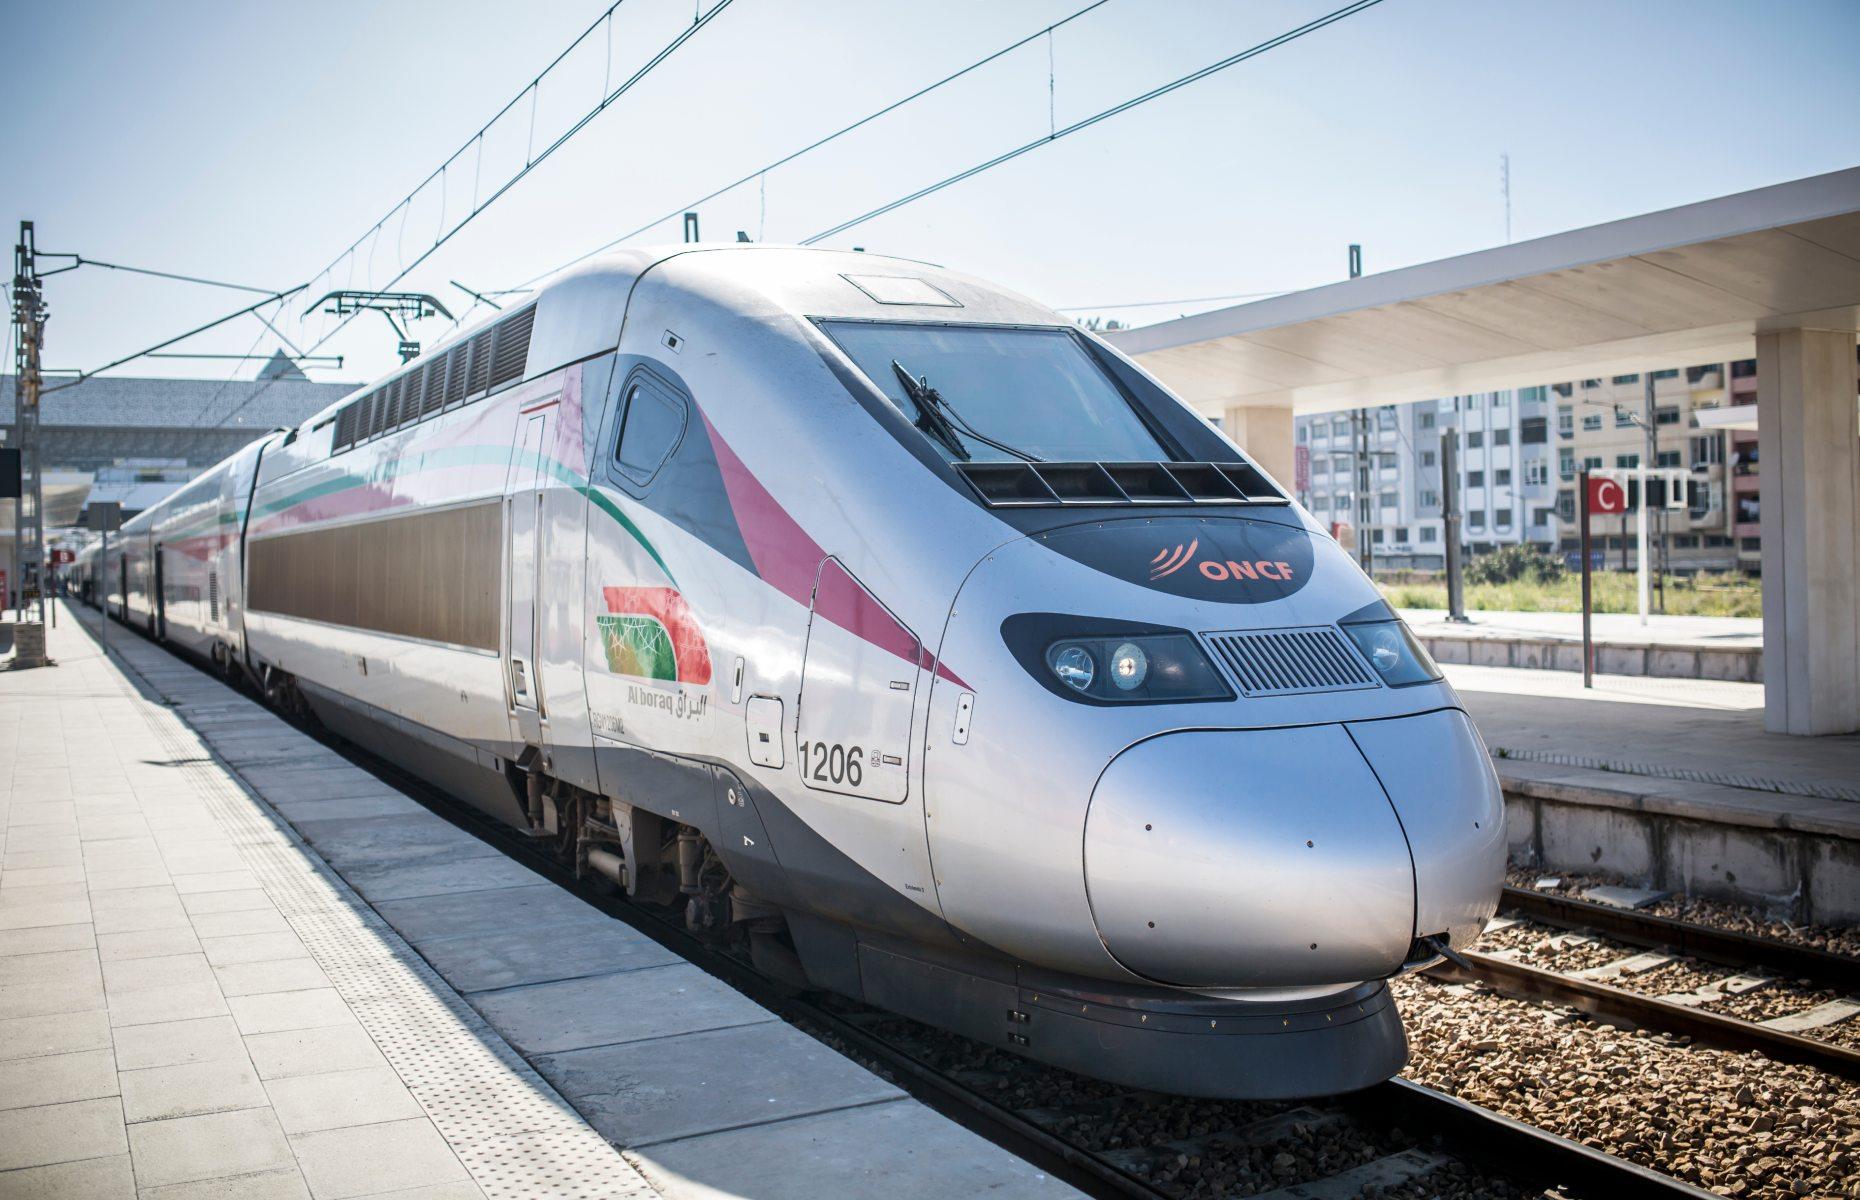 Taking inspiration from the Al Boraq (pictured) – Africa's first express train, which runs along the coast of Morocco from Tangier to Casablanca – the African Union is now in the process of laying the groundwork for a speedy, continent-wide rail system of epic proportions. Known as the African Integrated High-Speed Railway Network, the megaproject is expected to open in its first phase by 2033, with more connections to be added by 2063.